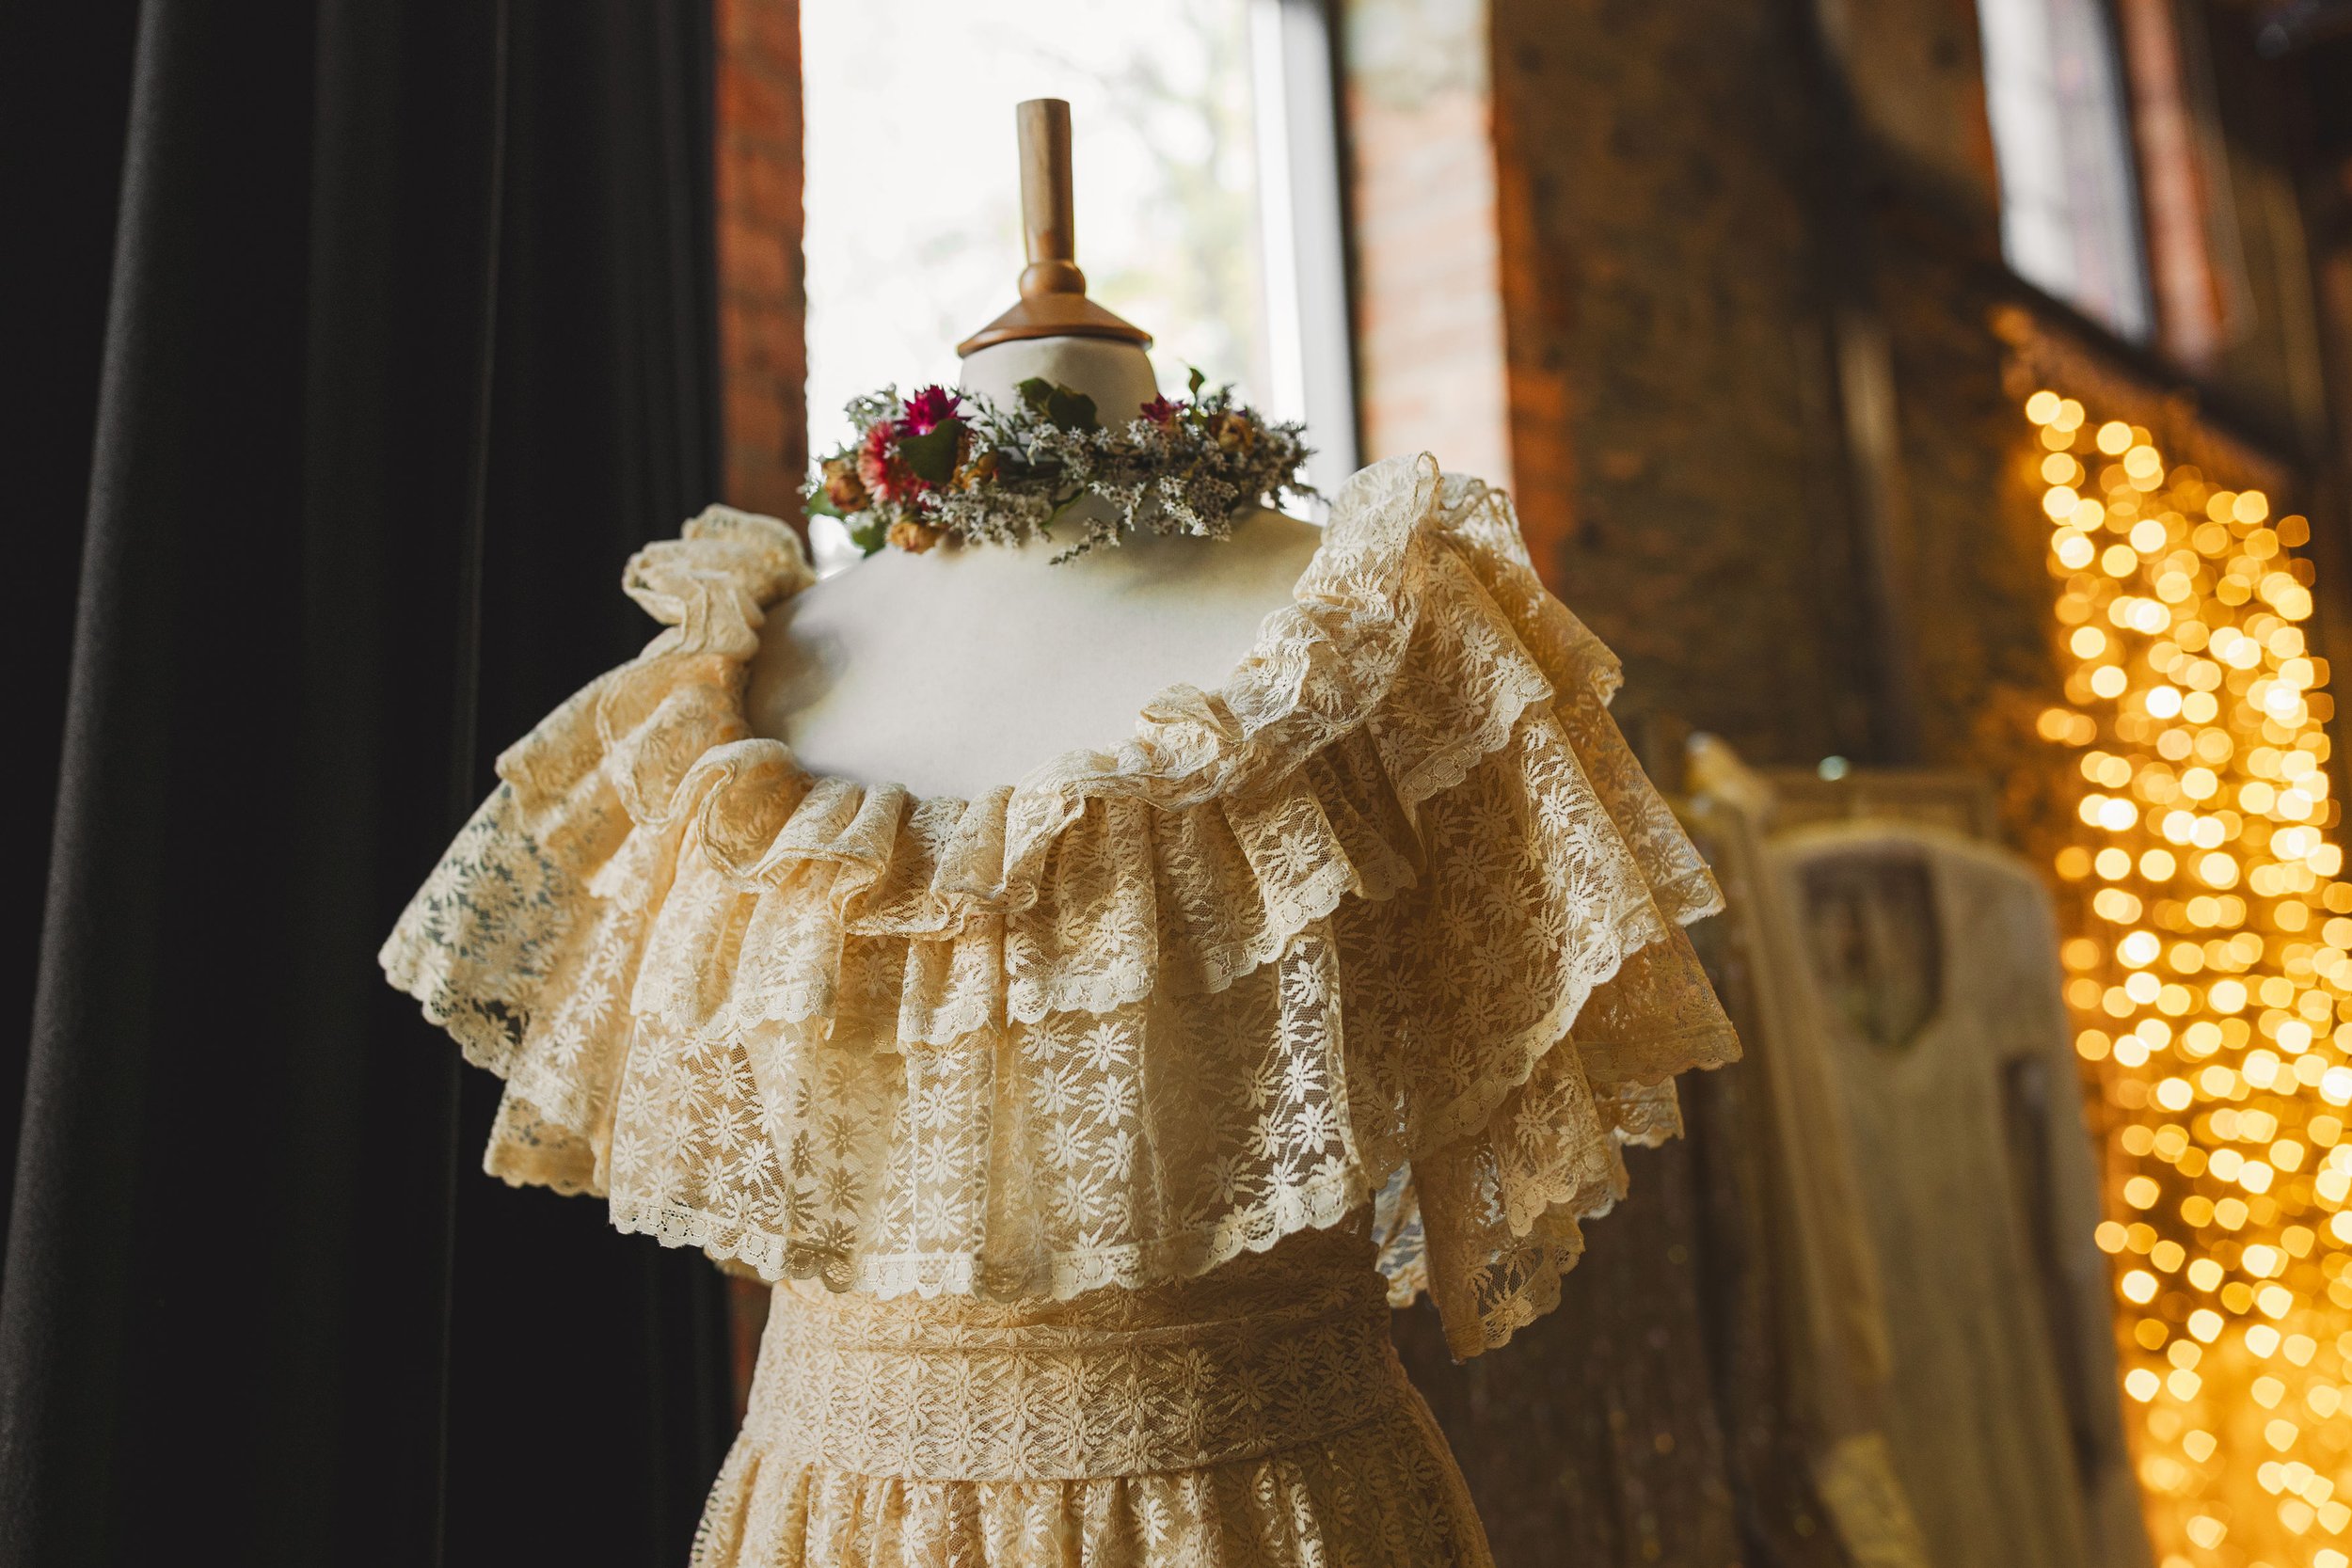  A close up of a beautiful vintage wedding dress displayed on a cream mannequin.  